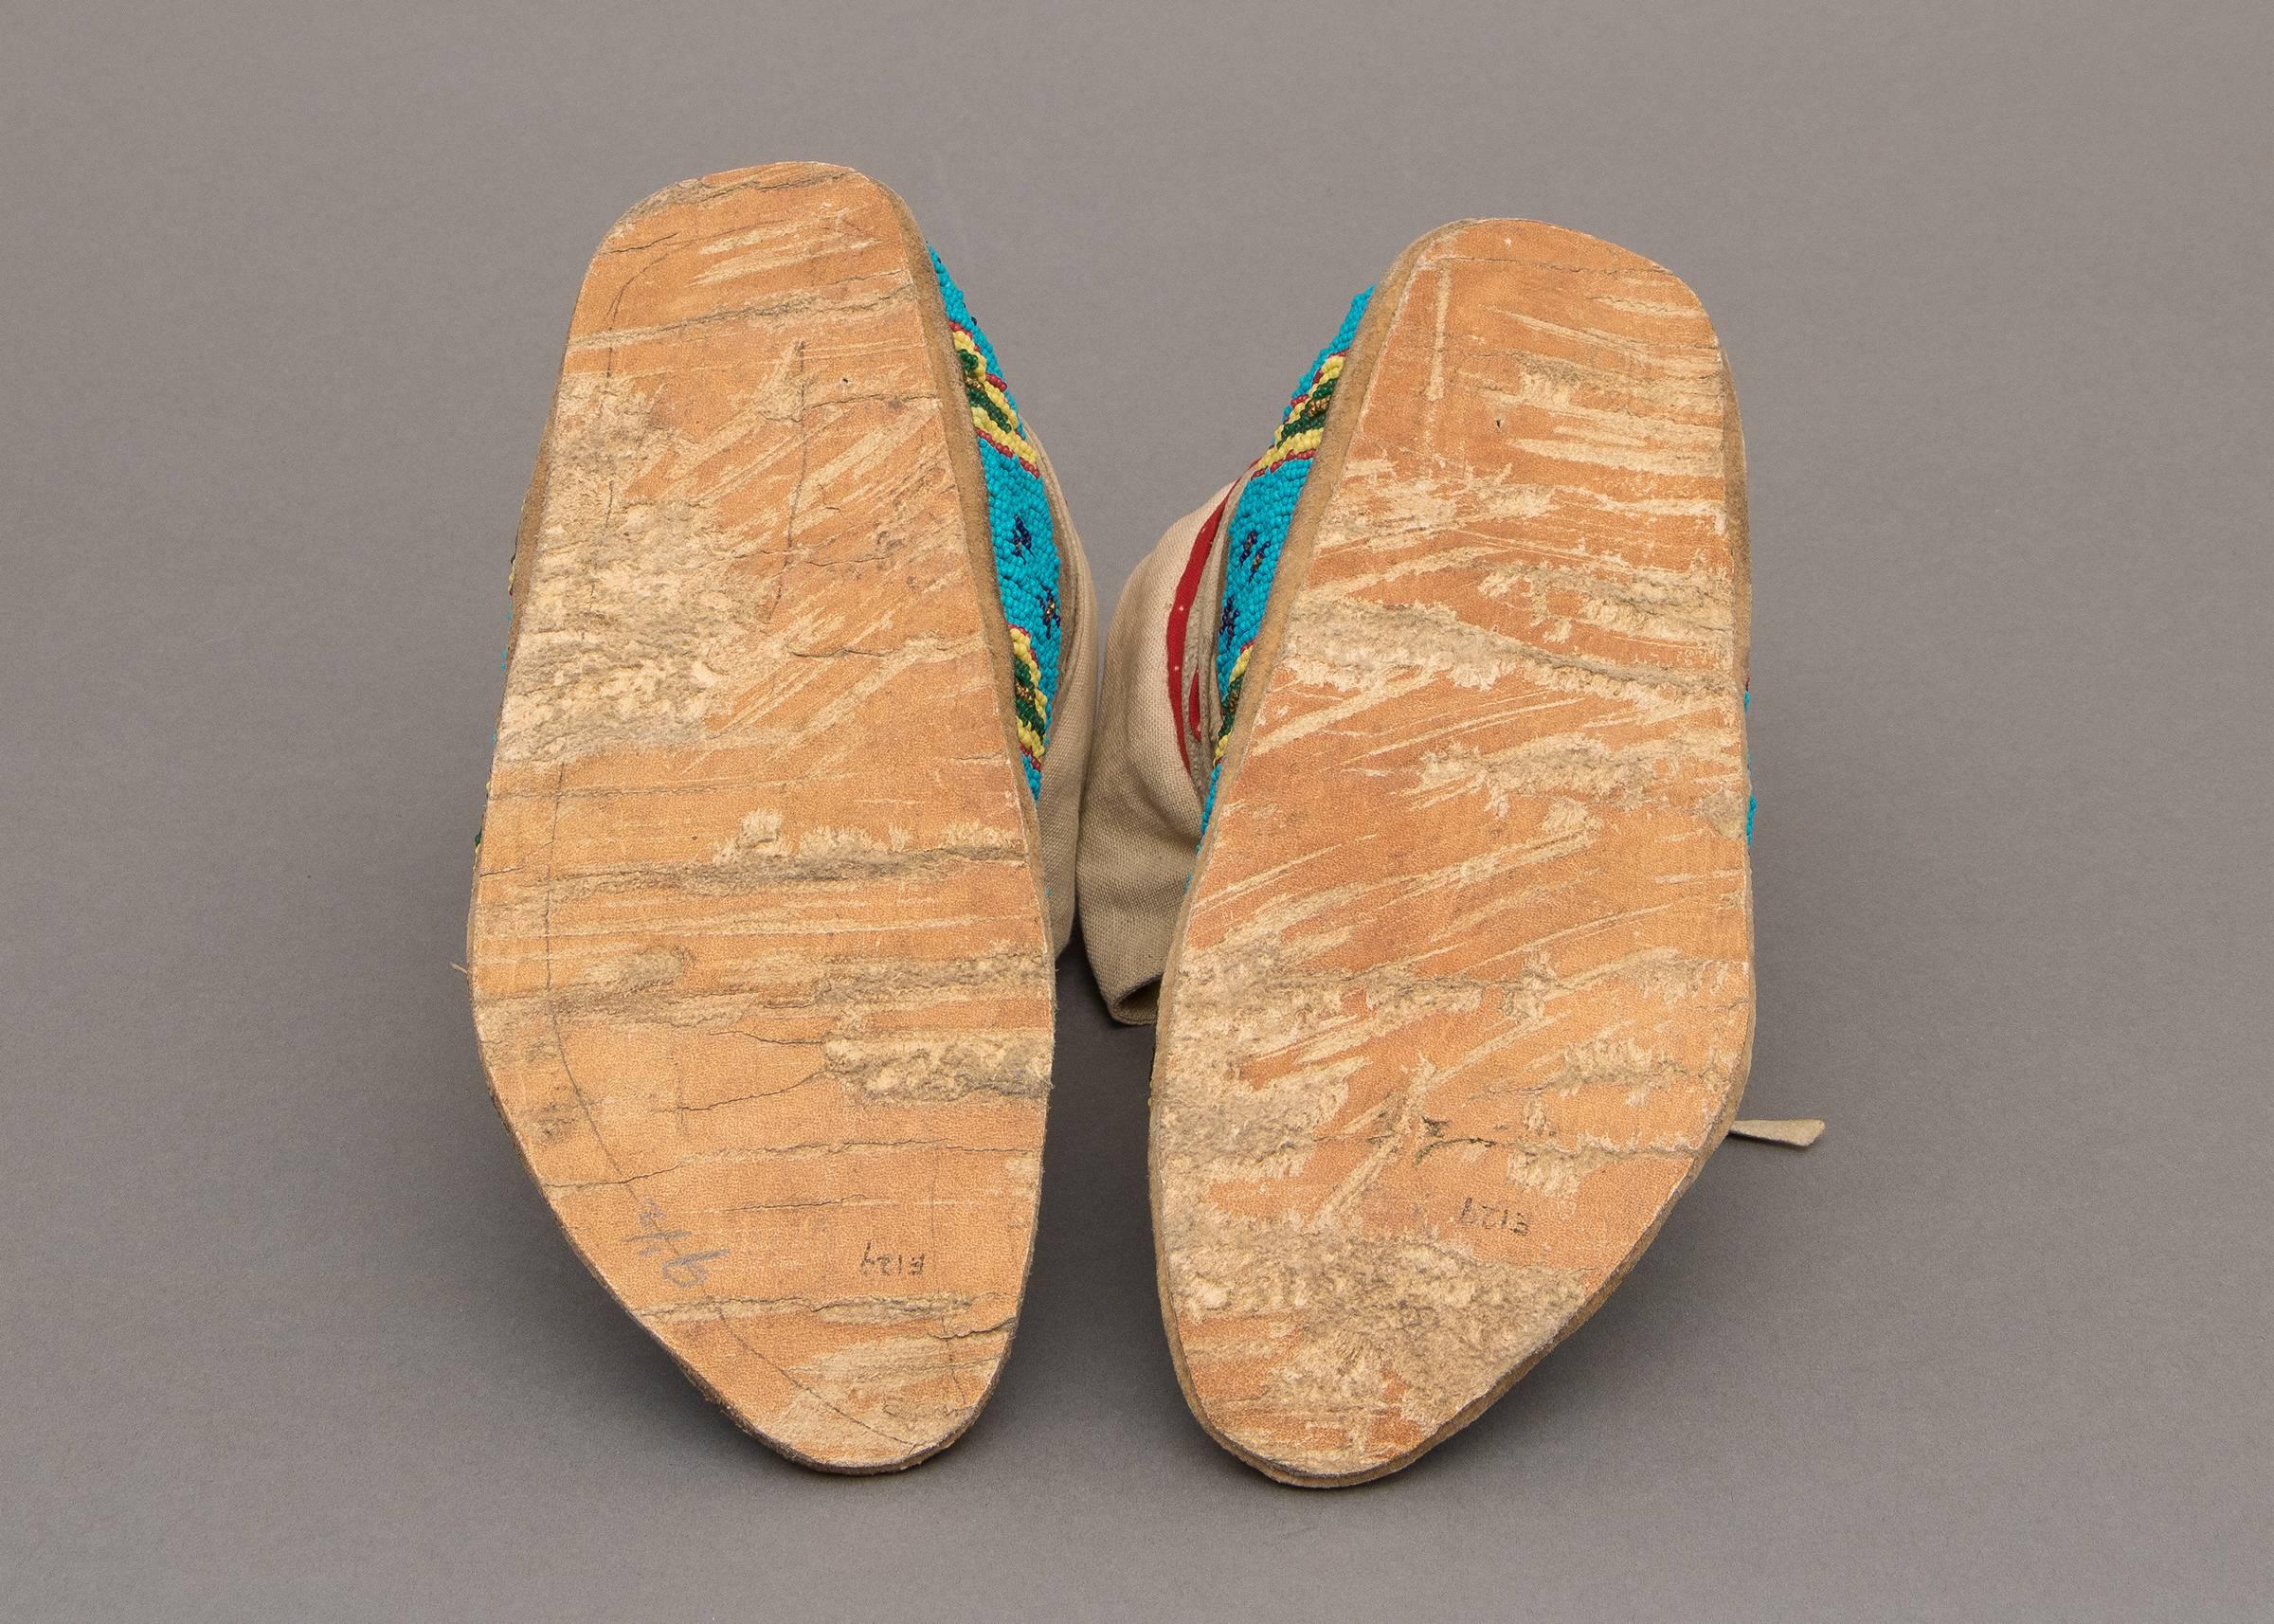 Hide Antique Native American Indian Beaded Moccasins, Sioux, Late 19th Century